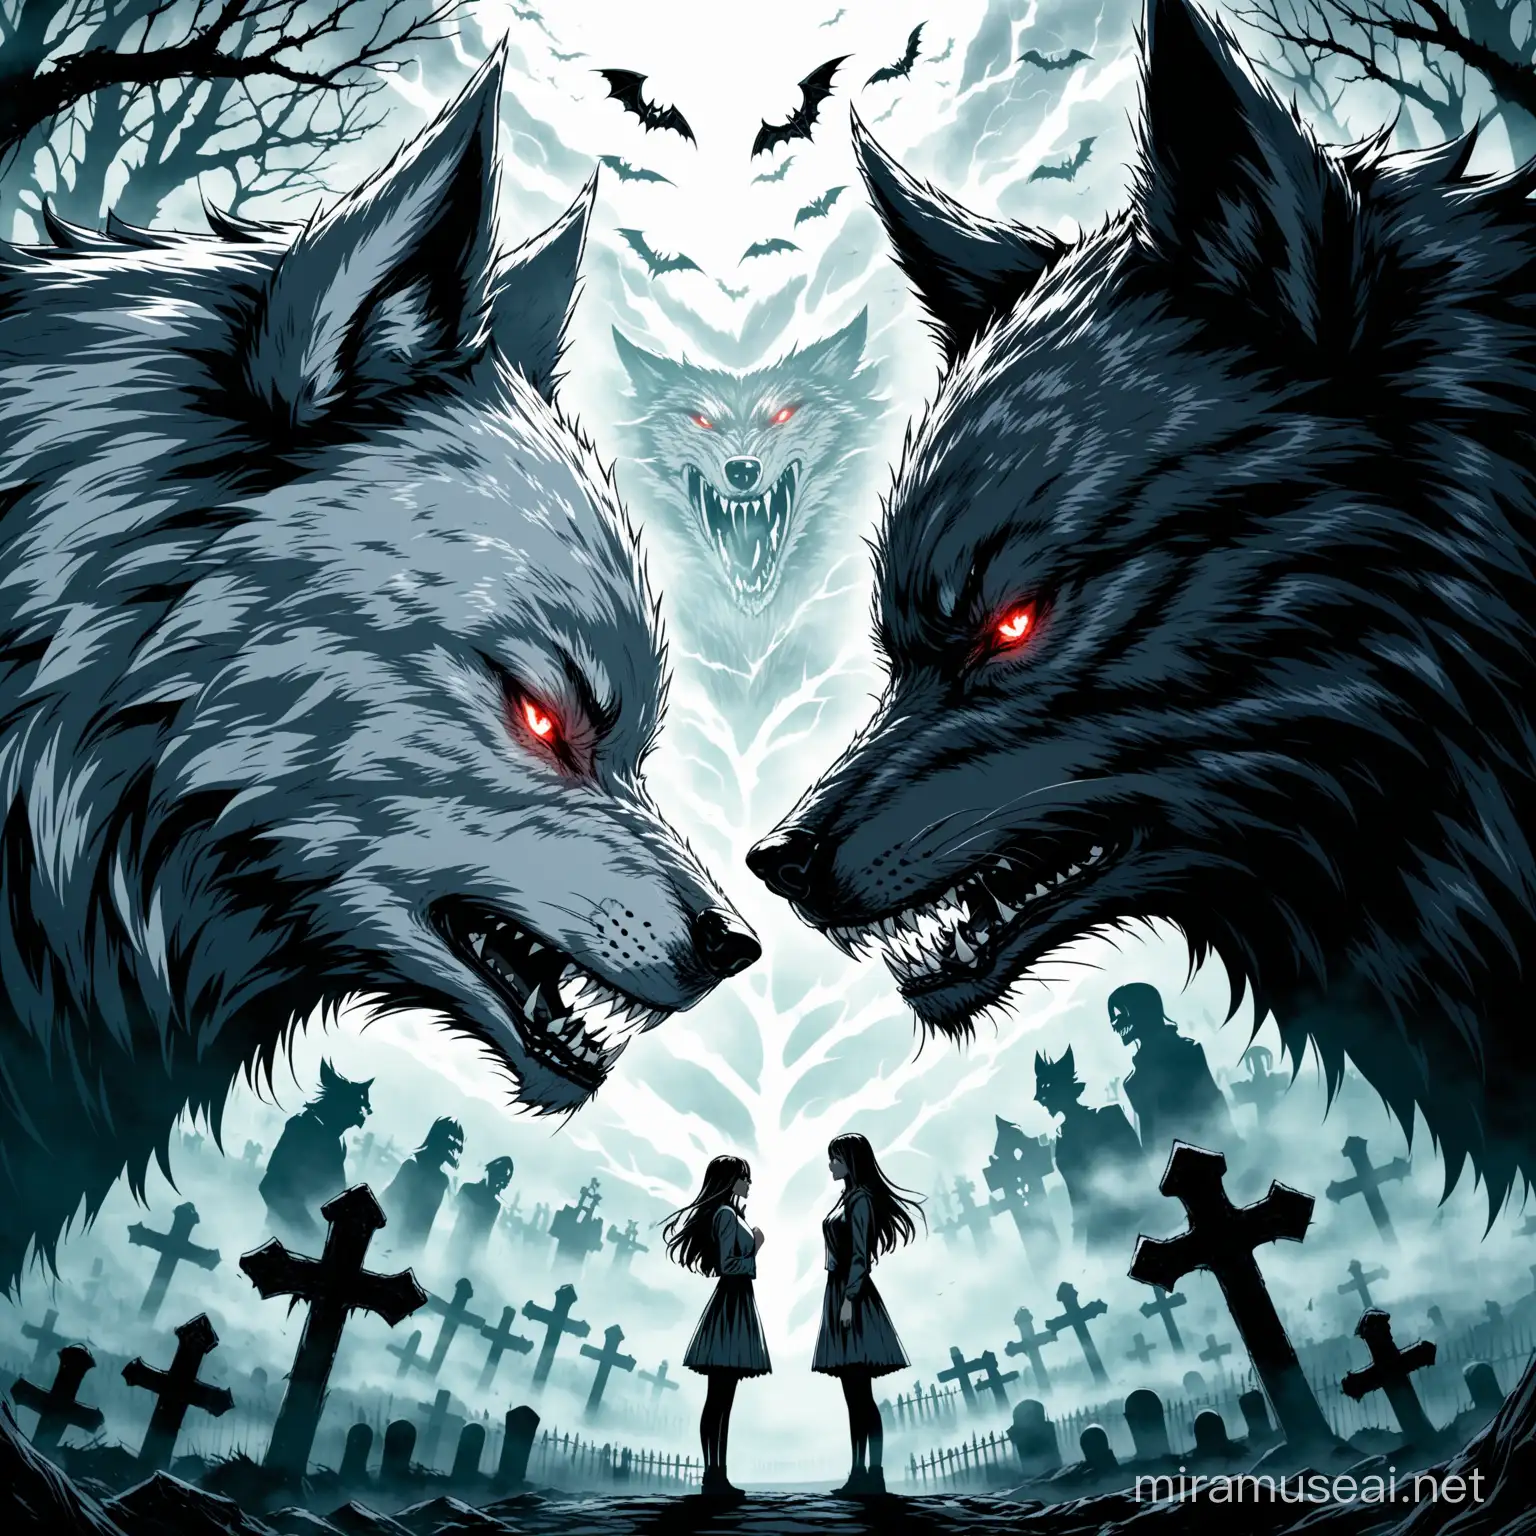 Intense Confrontation Beautiful Girl and Demon Wolf in Misty Graveyard